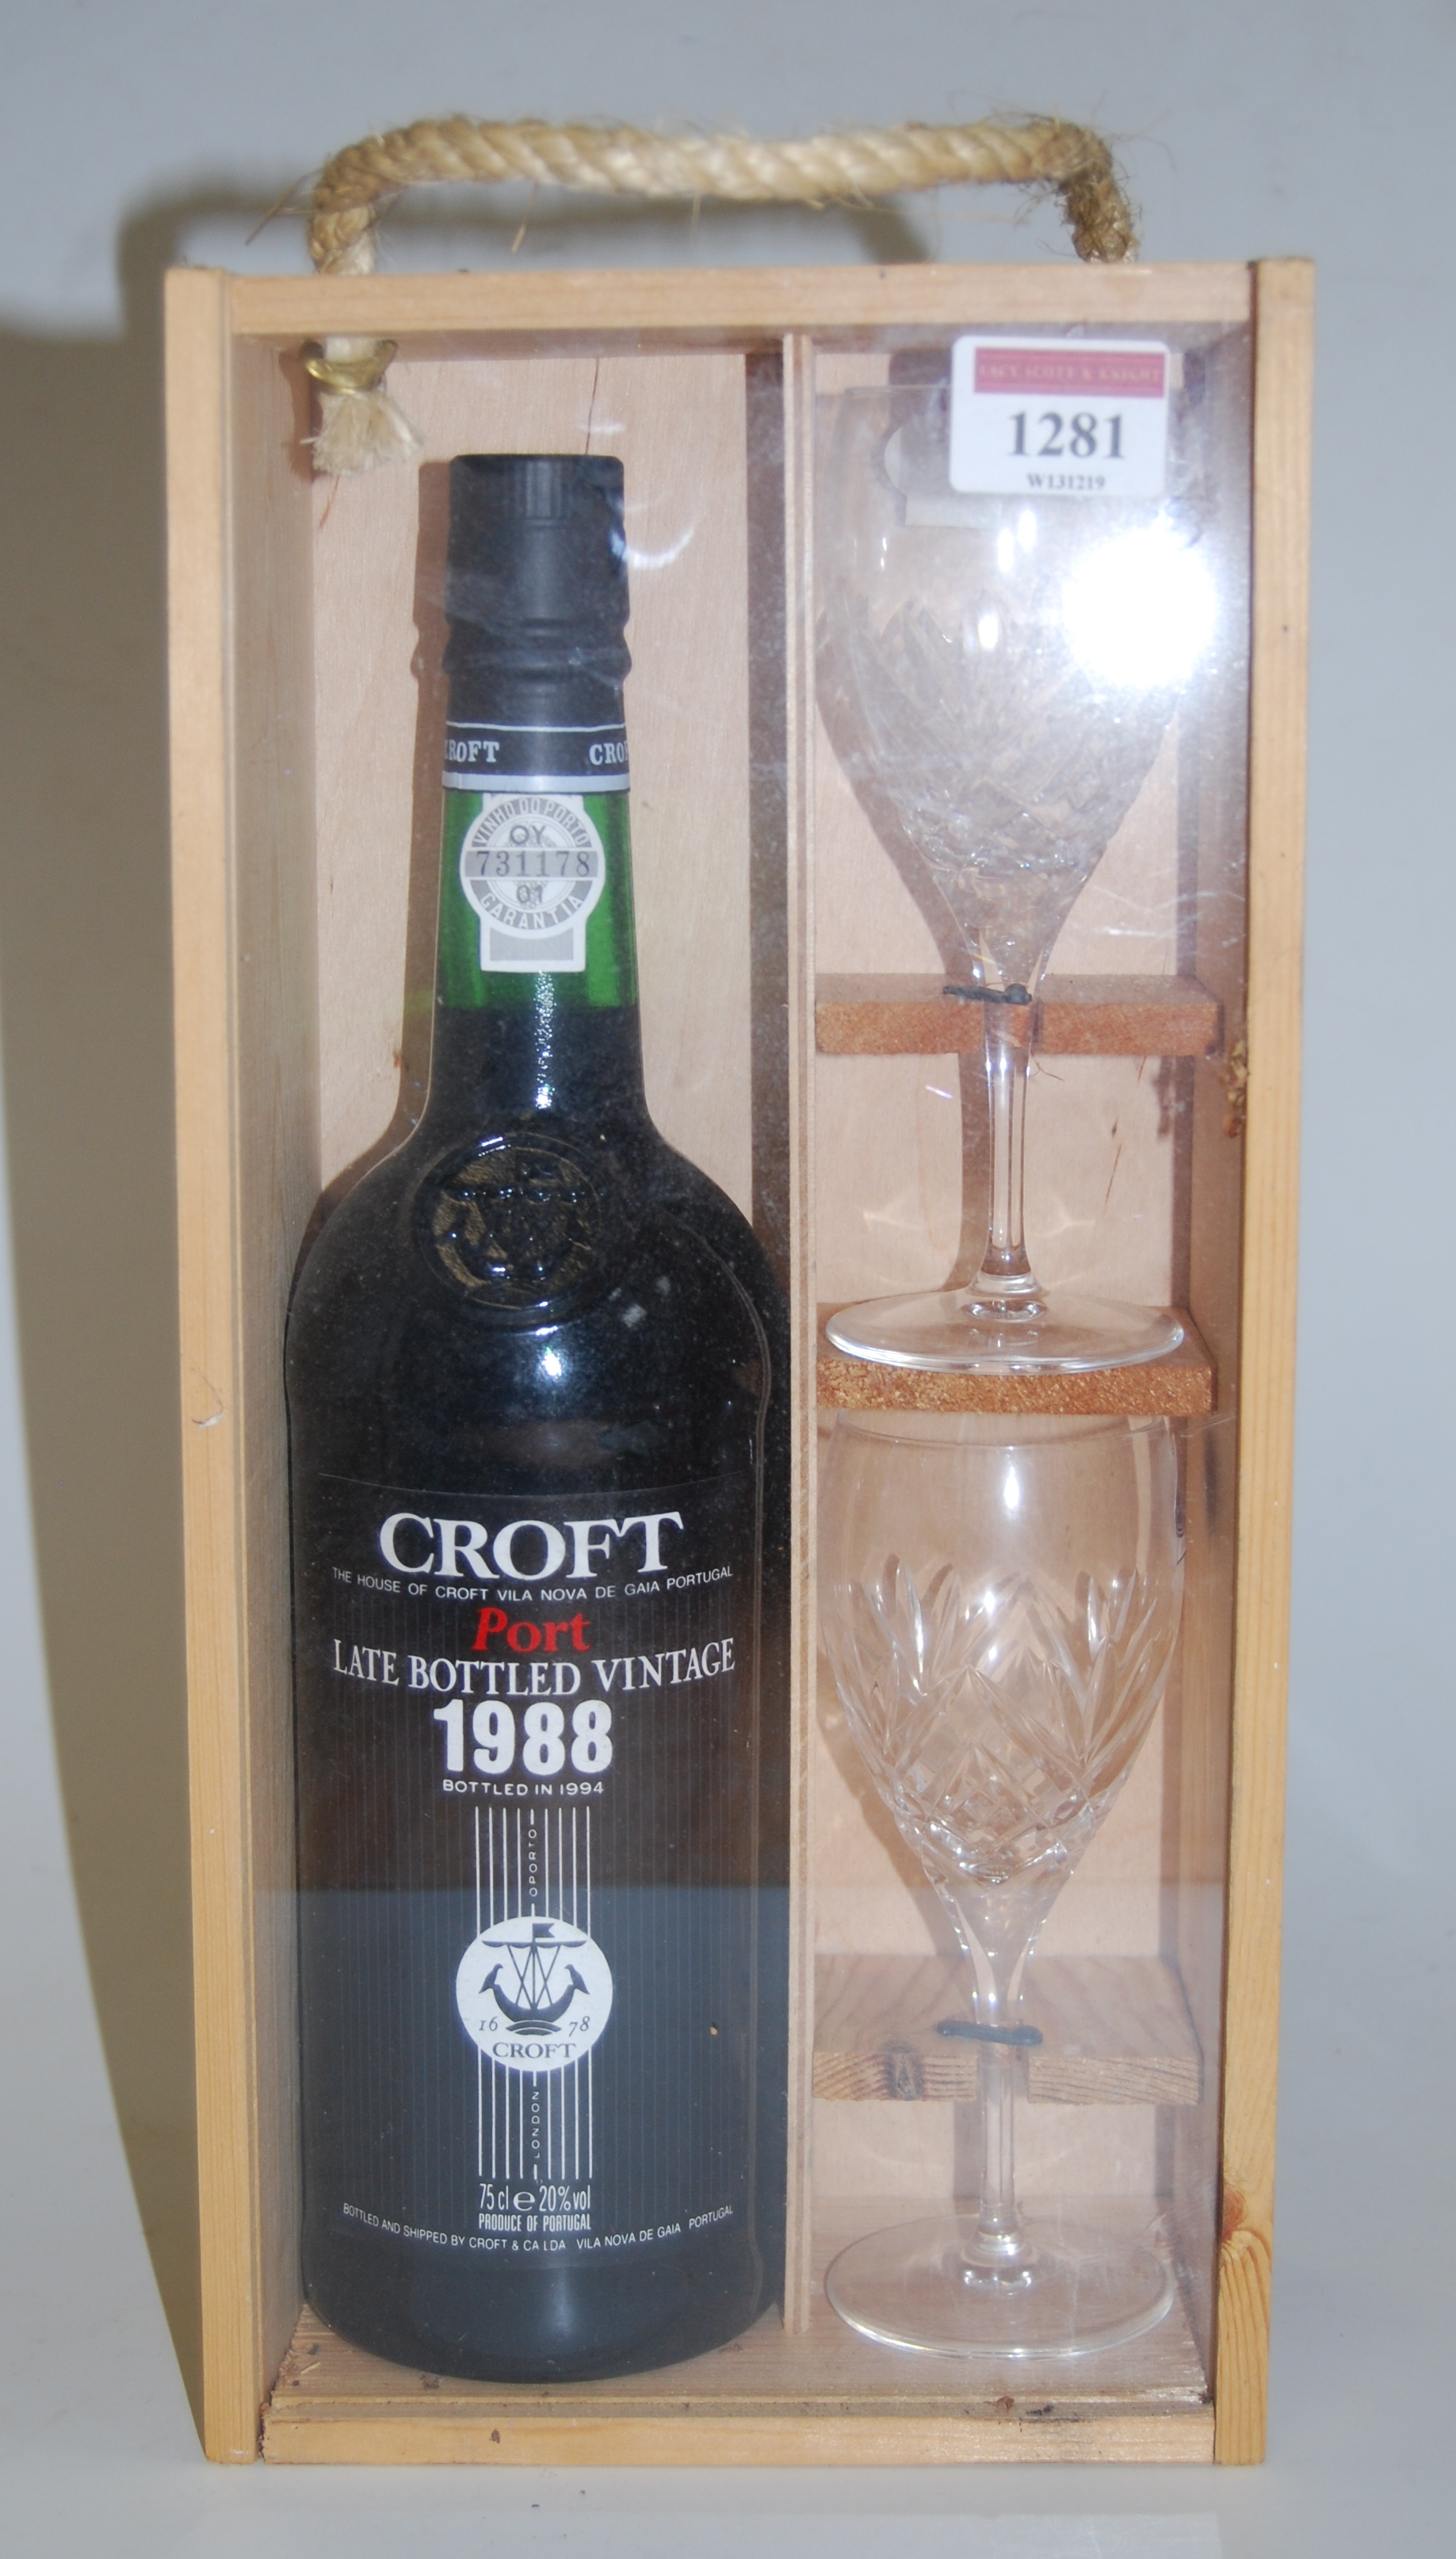 Croft 1988 LBV port, three bottles each in gift box with a pair of glasses